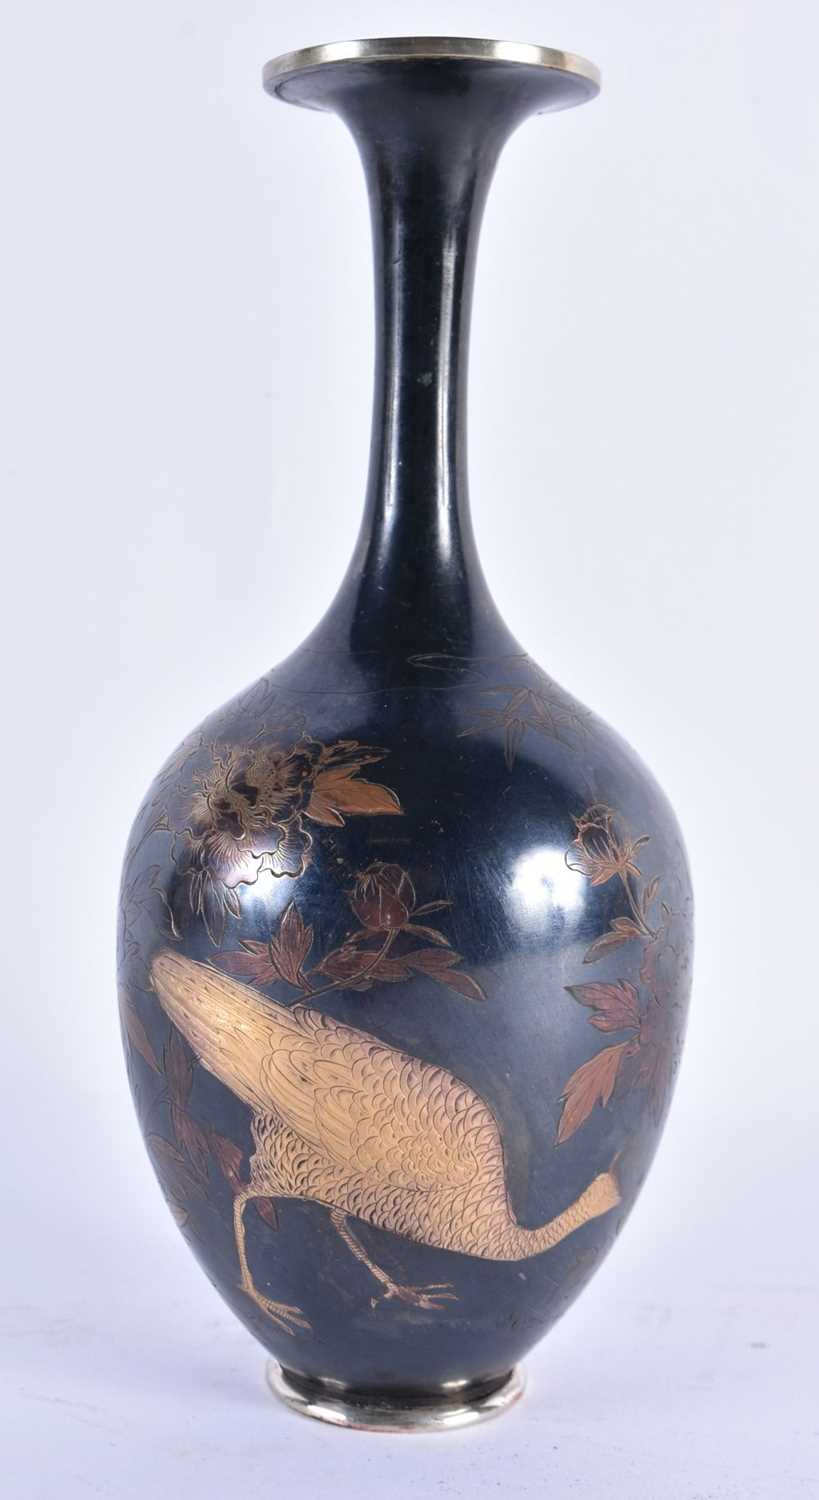 A LATE 19TH CENTURY JAPANESE MEIJI PERIOD SILVER AND SHAKUDO VASE engraved with birds and